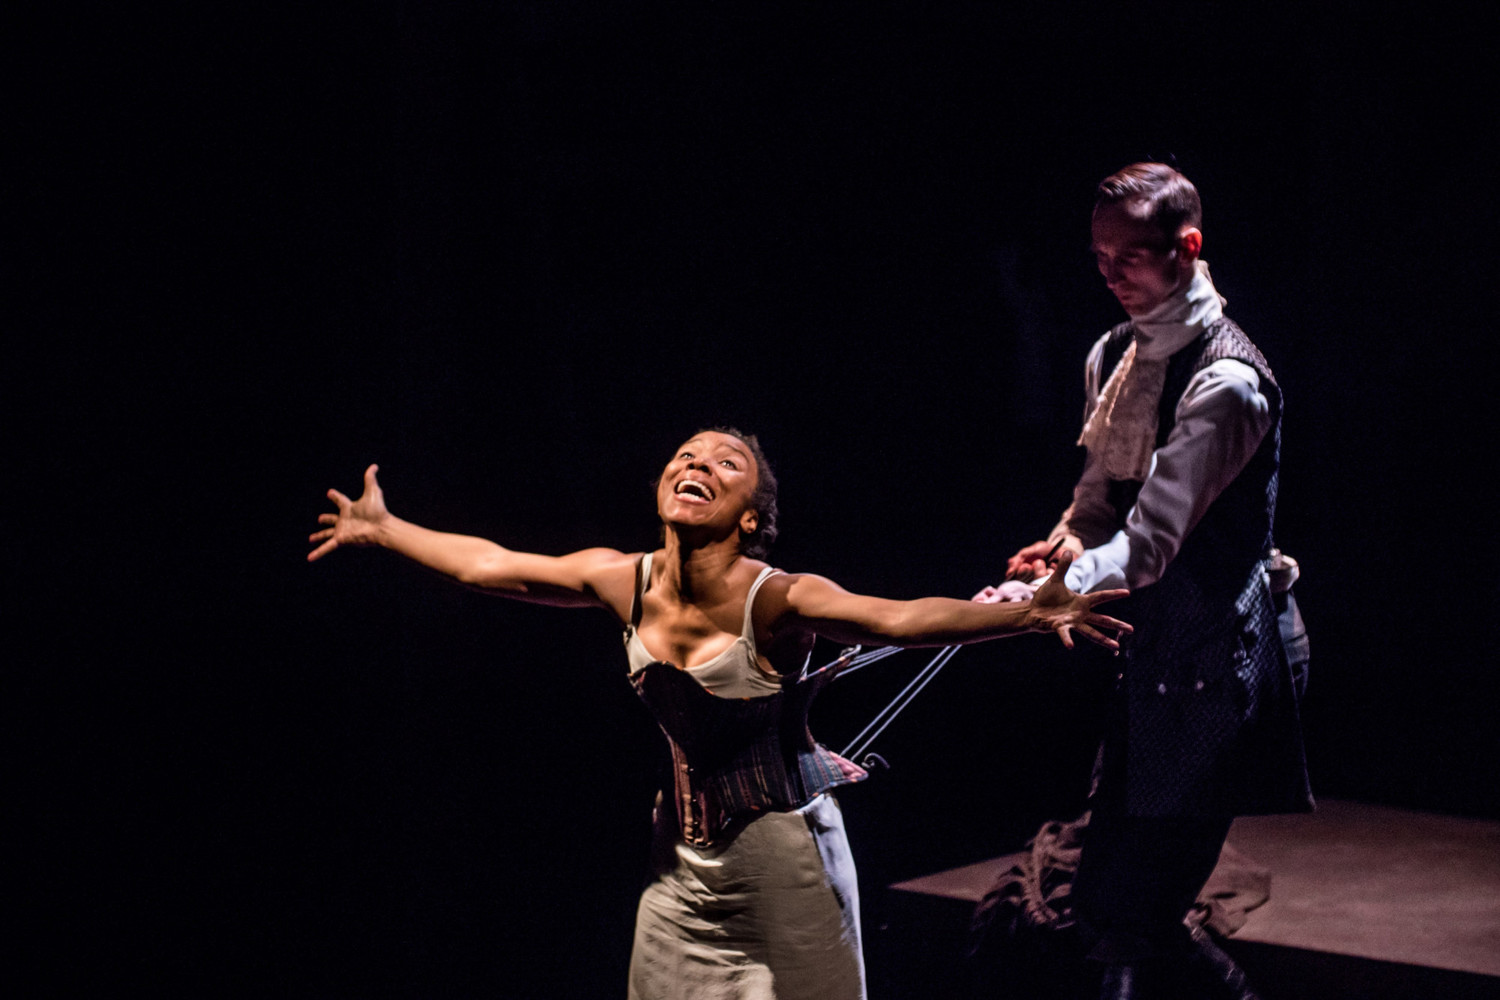 Review: Canadian Slavery and Women's Mistreatment Motivate ANGELIQUE in Gripping Toronto Premiere 